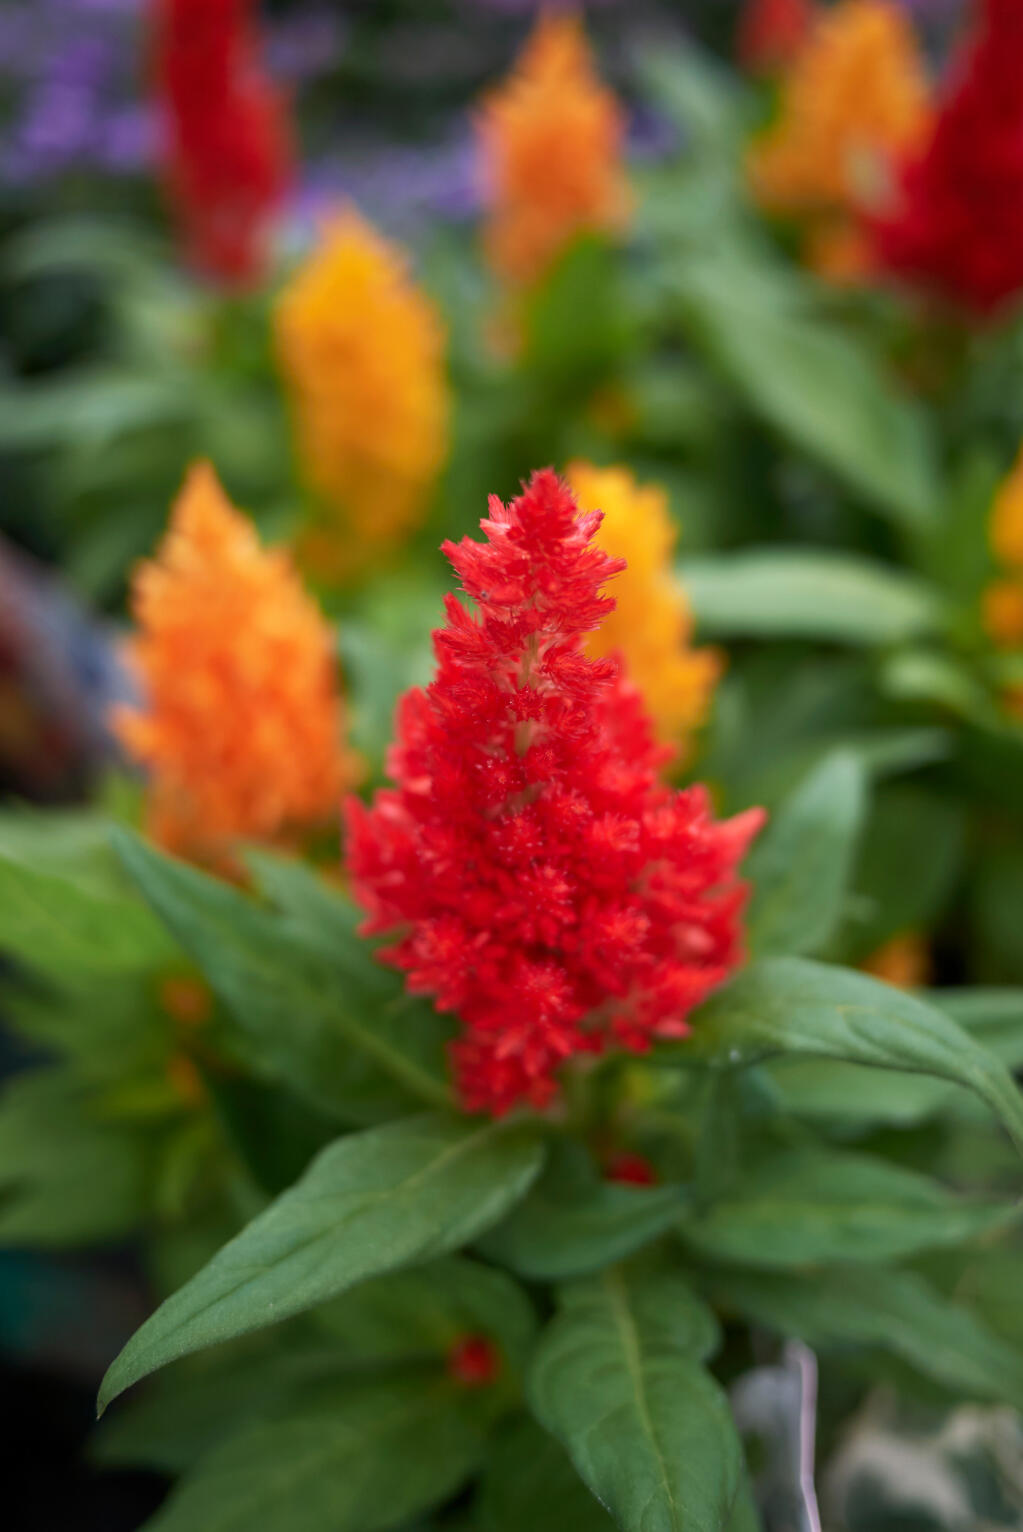 Celosia plumosa plants are grown for their plume-like 2- to 6-inch blooms. (Shutterstock)